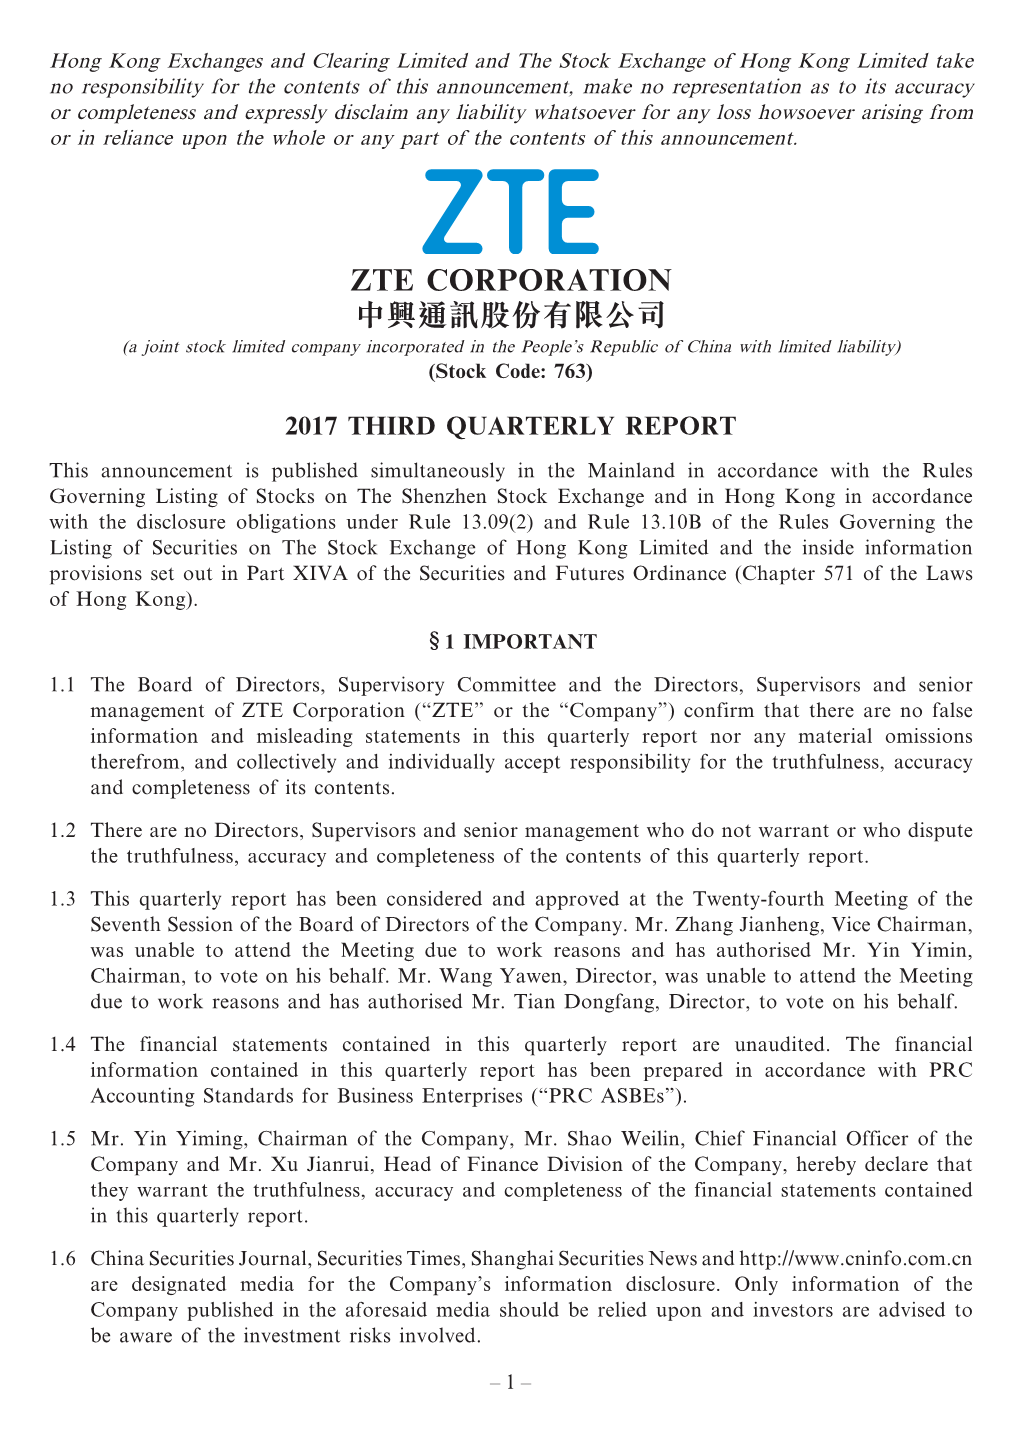 ZTE CORPORATION 中興通訊股份有限公司 (A Joint Stock Limited Company Incorporated in the People’S Republic of China with Limited Liability) (Stock Code: 763)